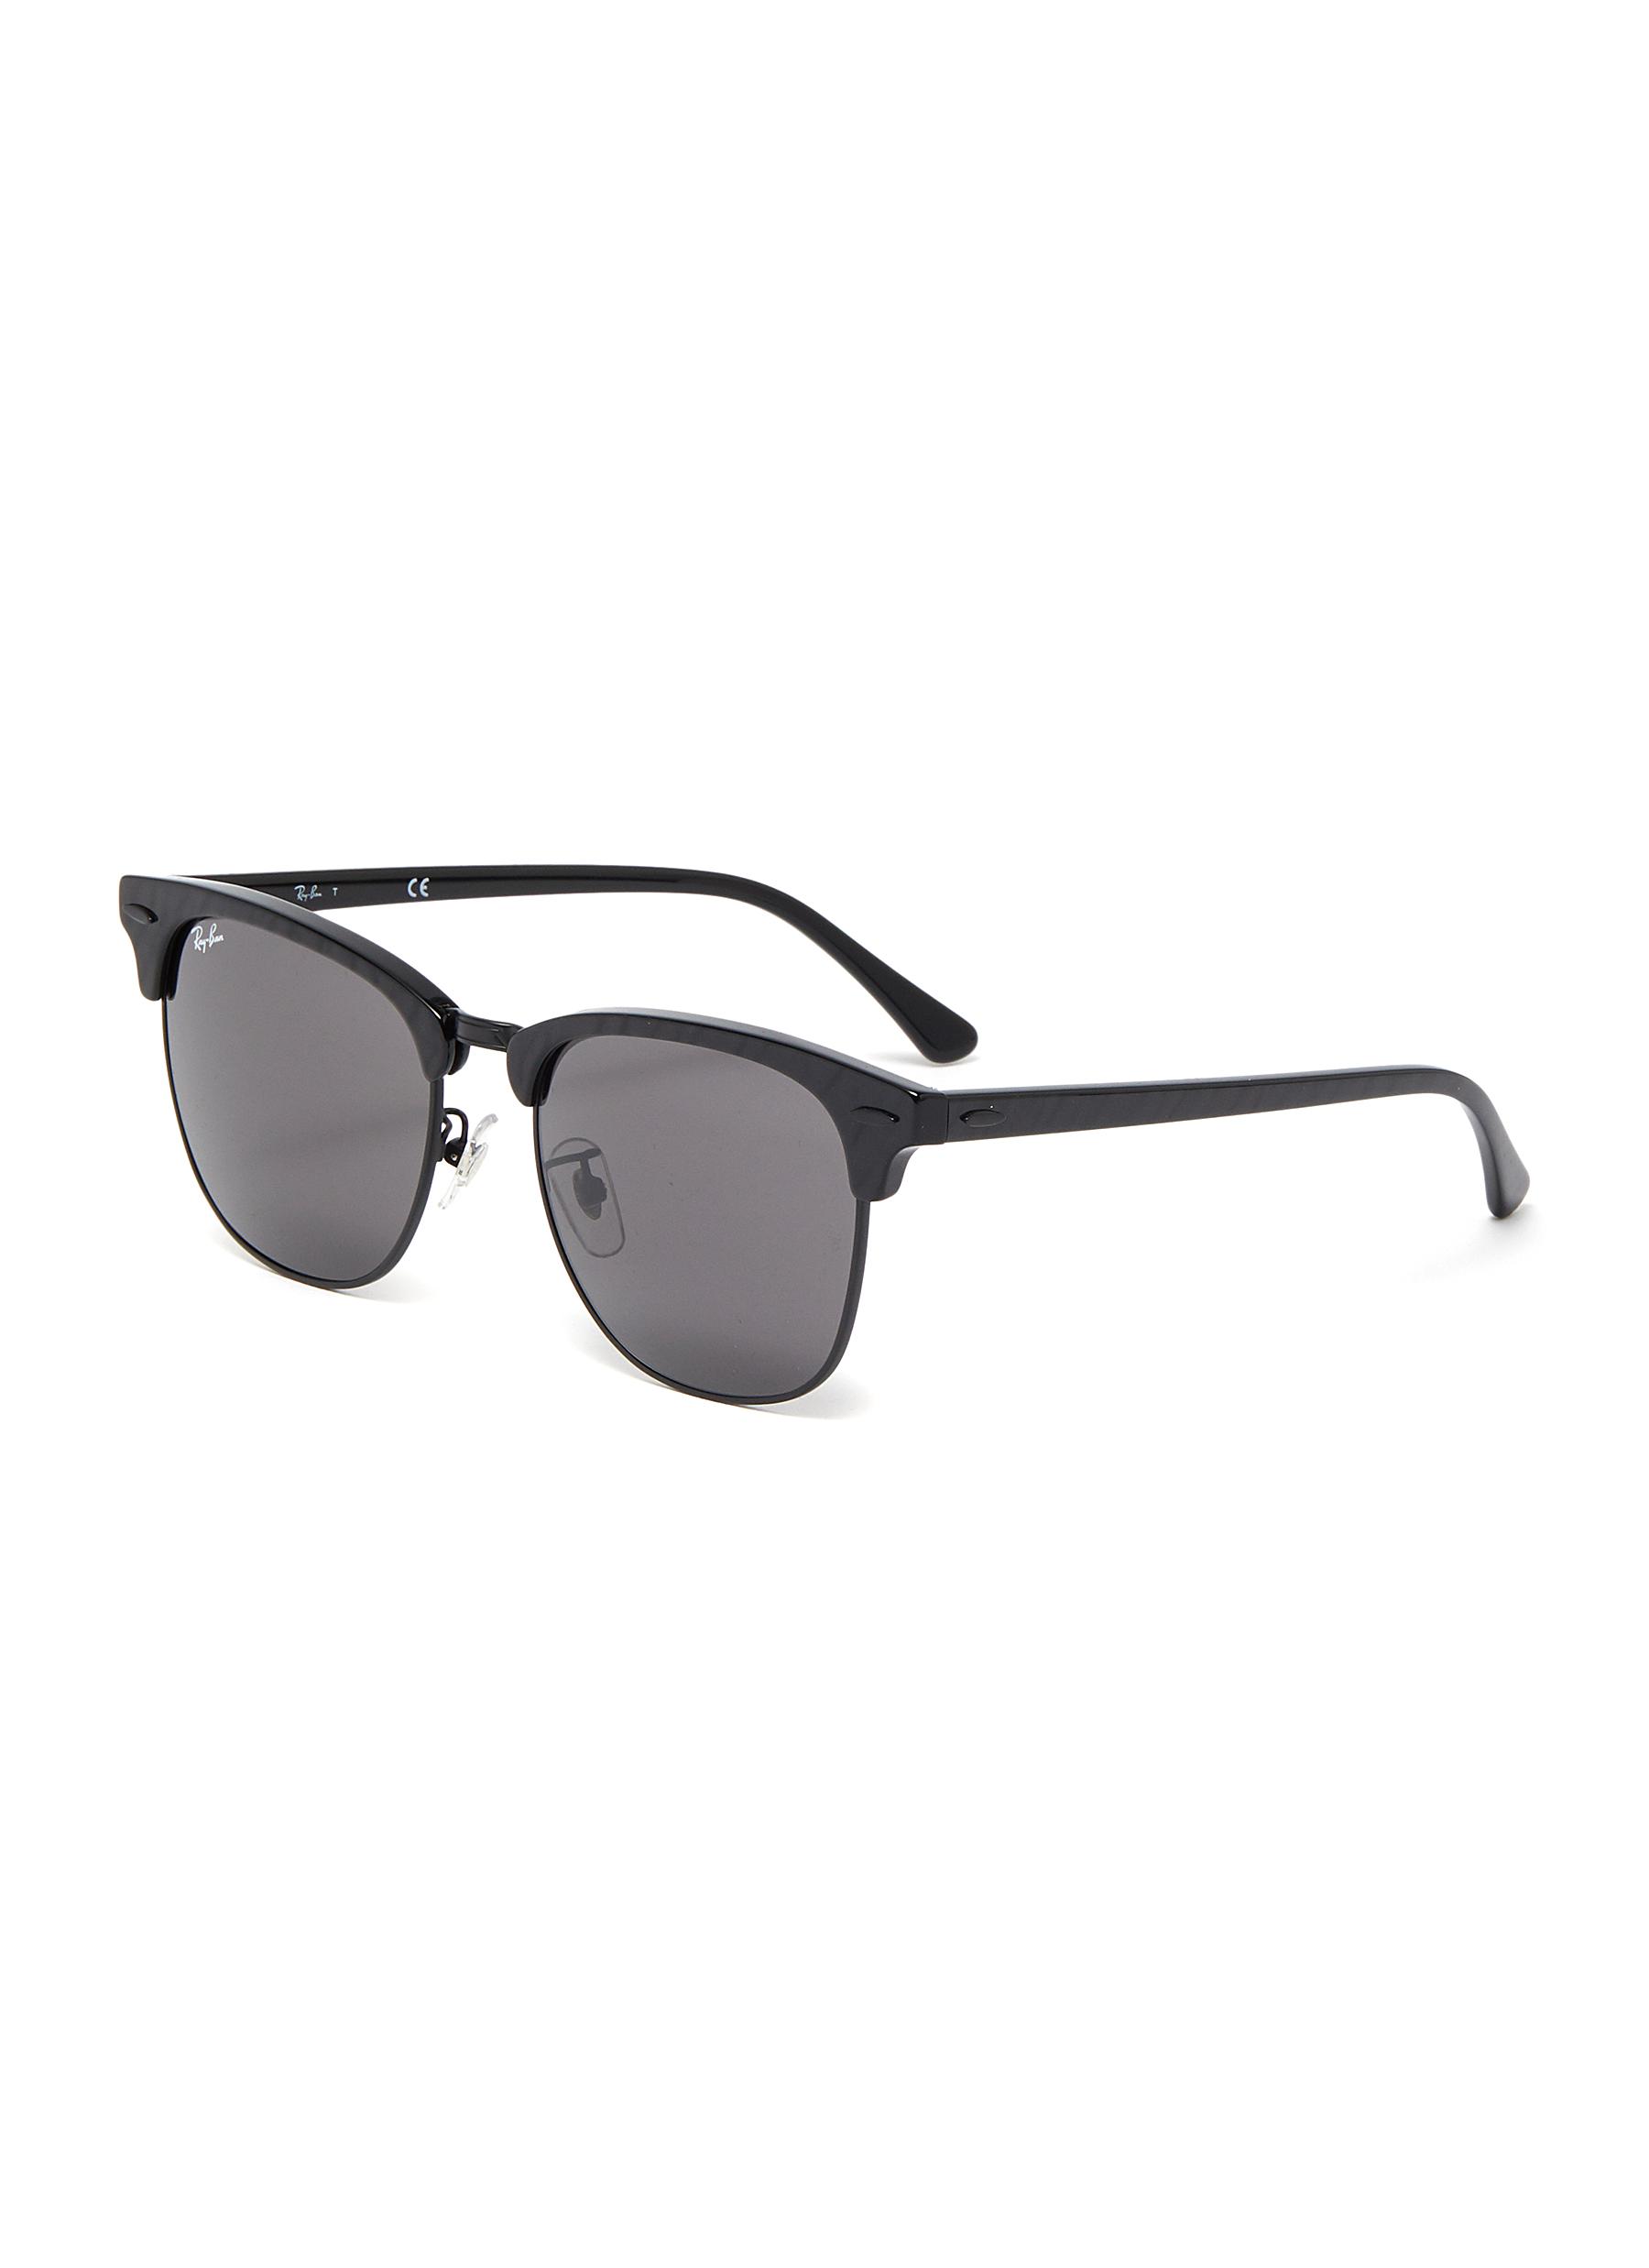 ray ban horn rimmed